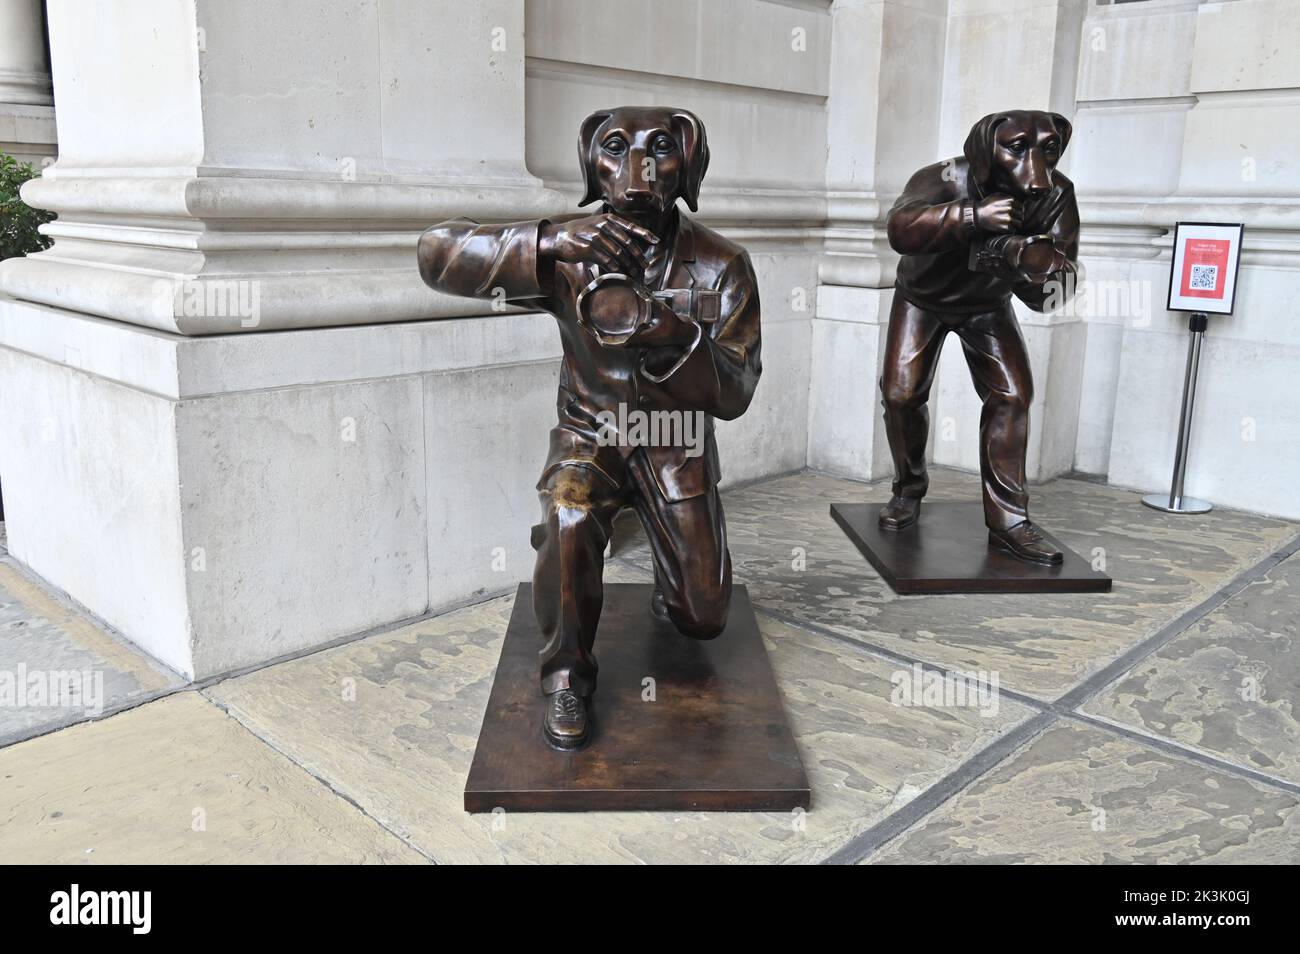 The paparazzi dogs are bronze sculptures created by Gillie and Marc stand outside the entrance to the Royal Exchange in the City of London Stock Photo